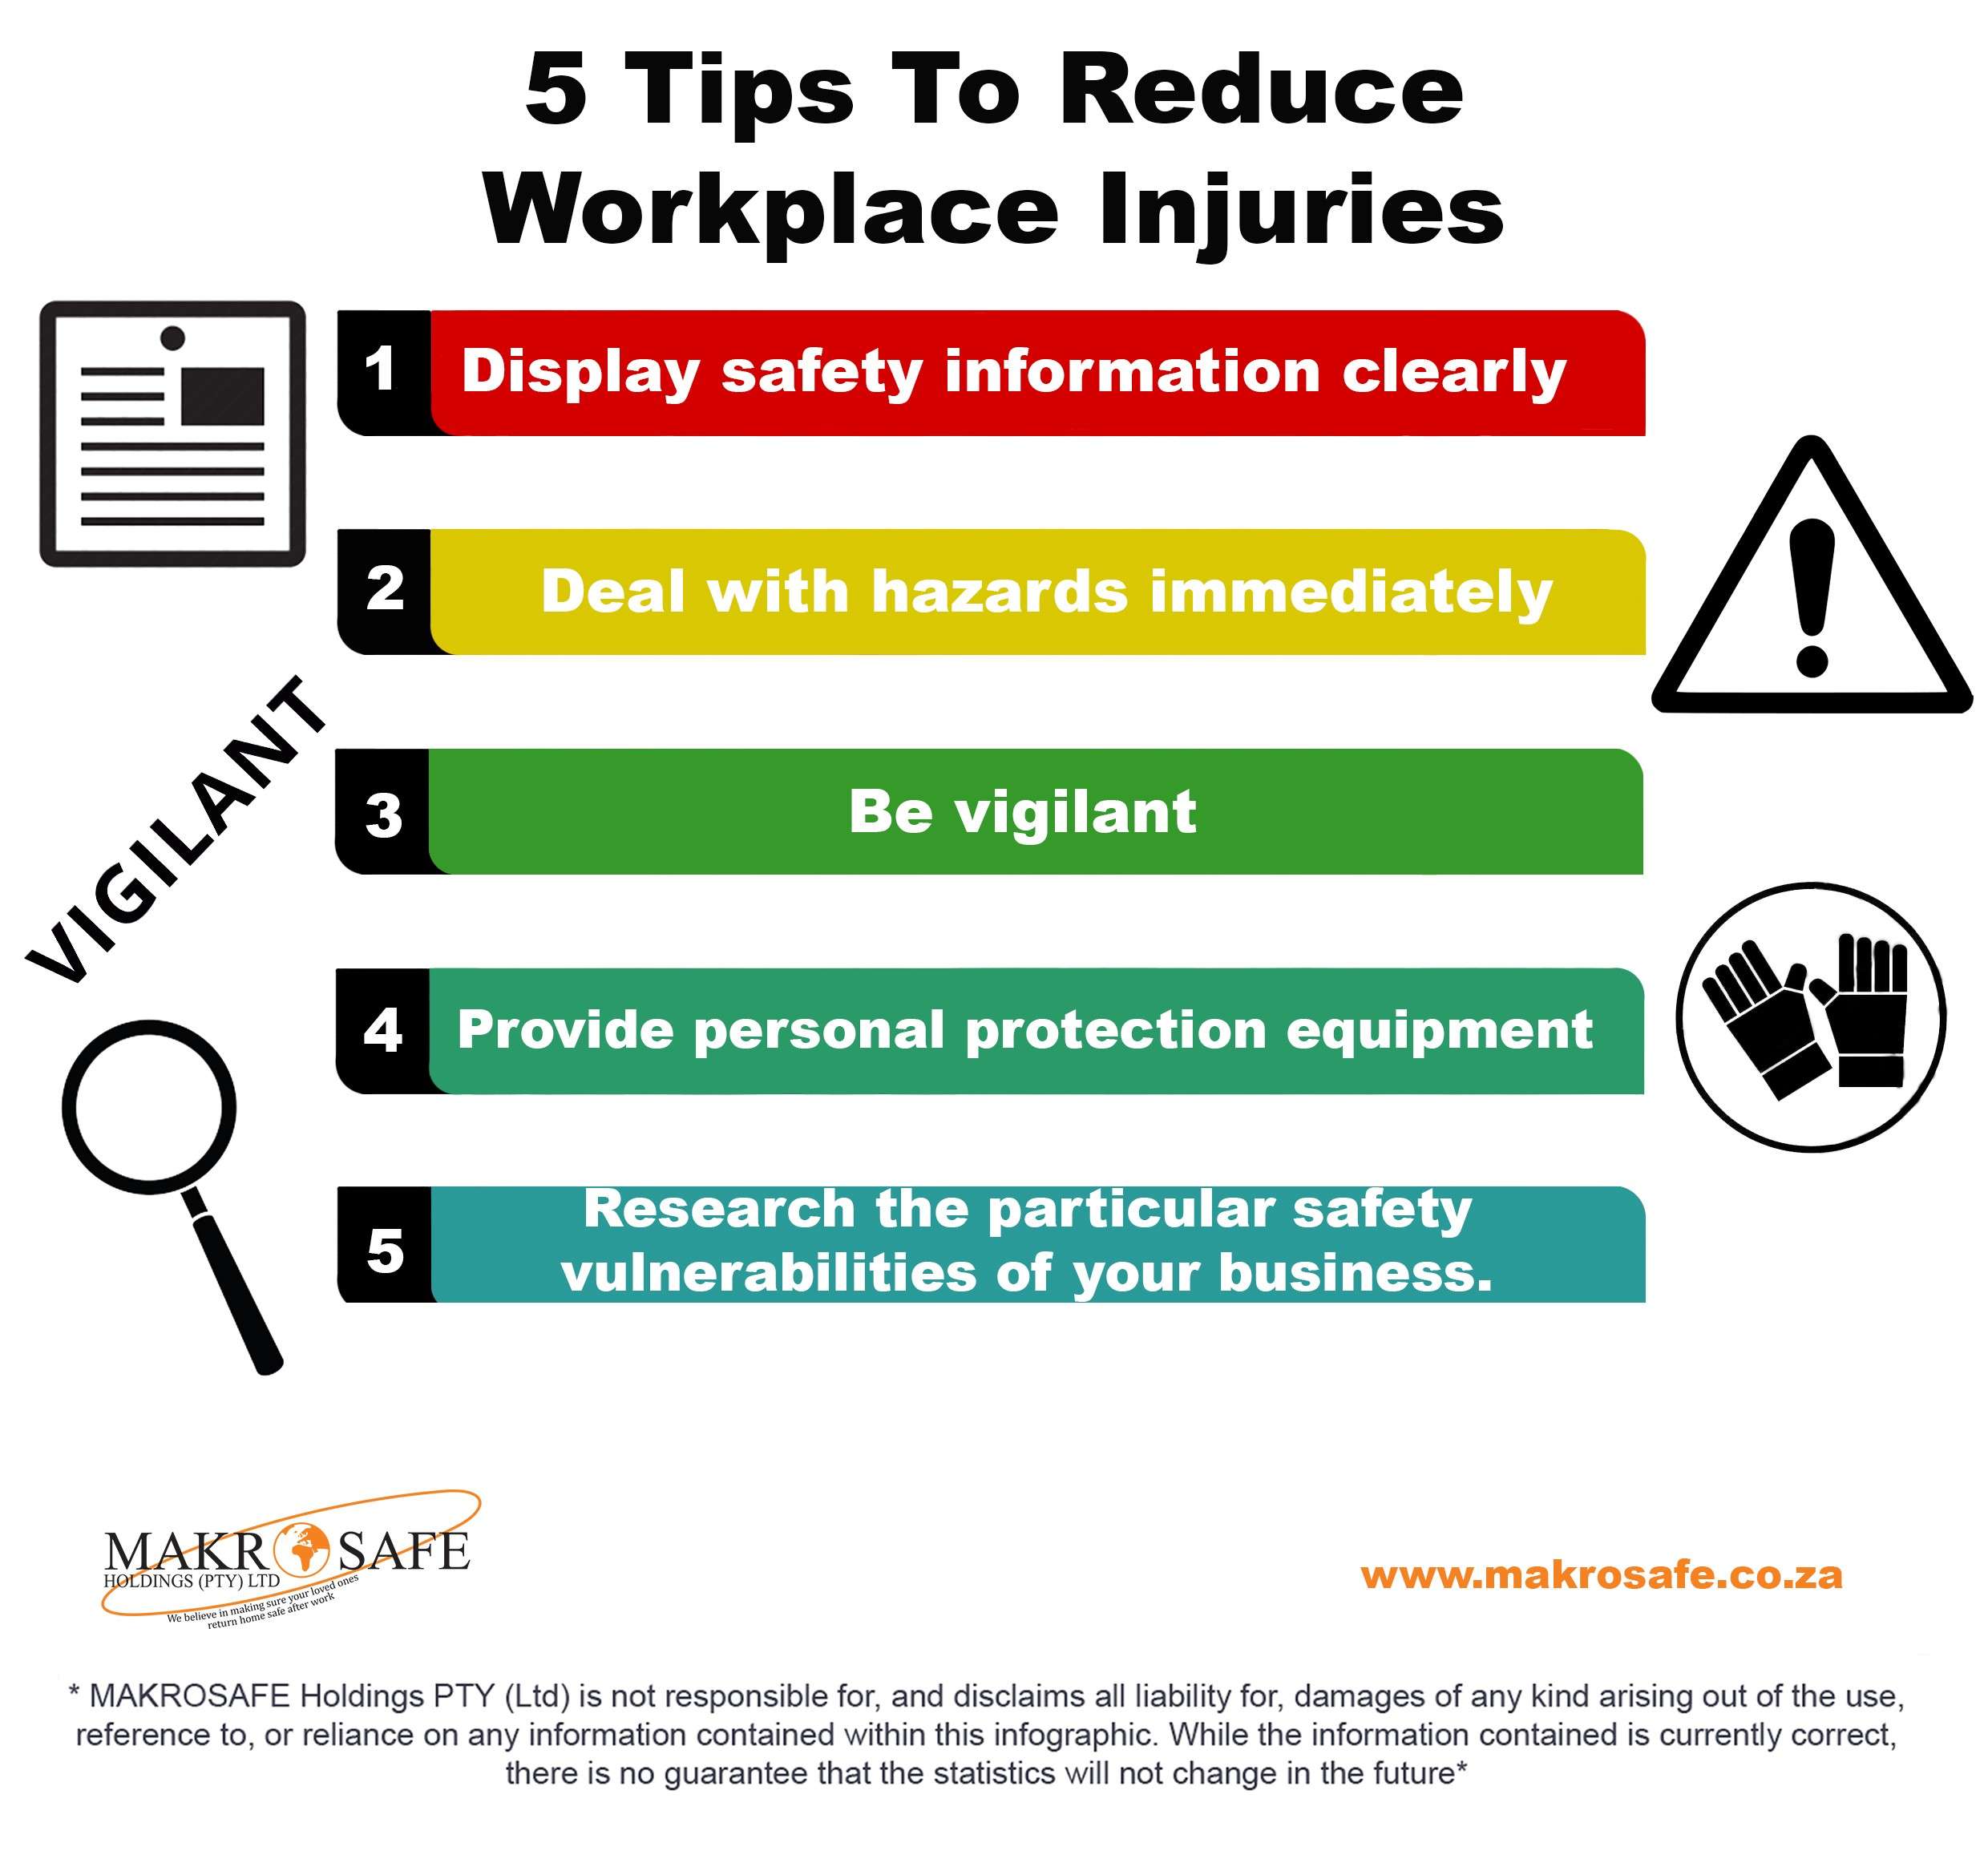 5 Tips to reduce Workplace Injuries